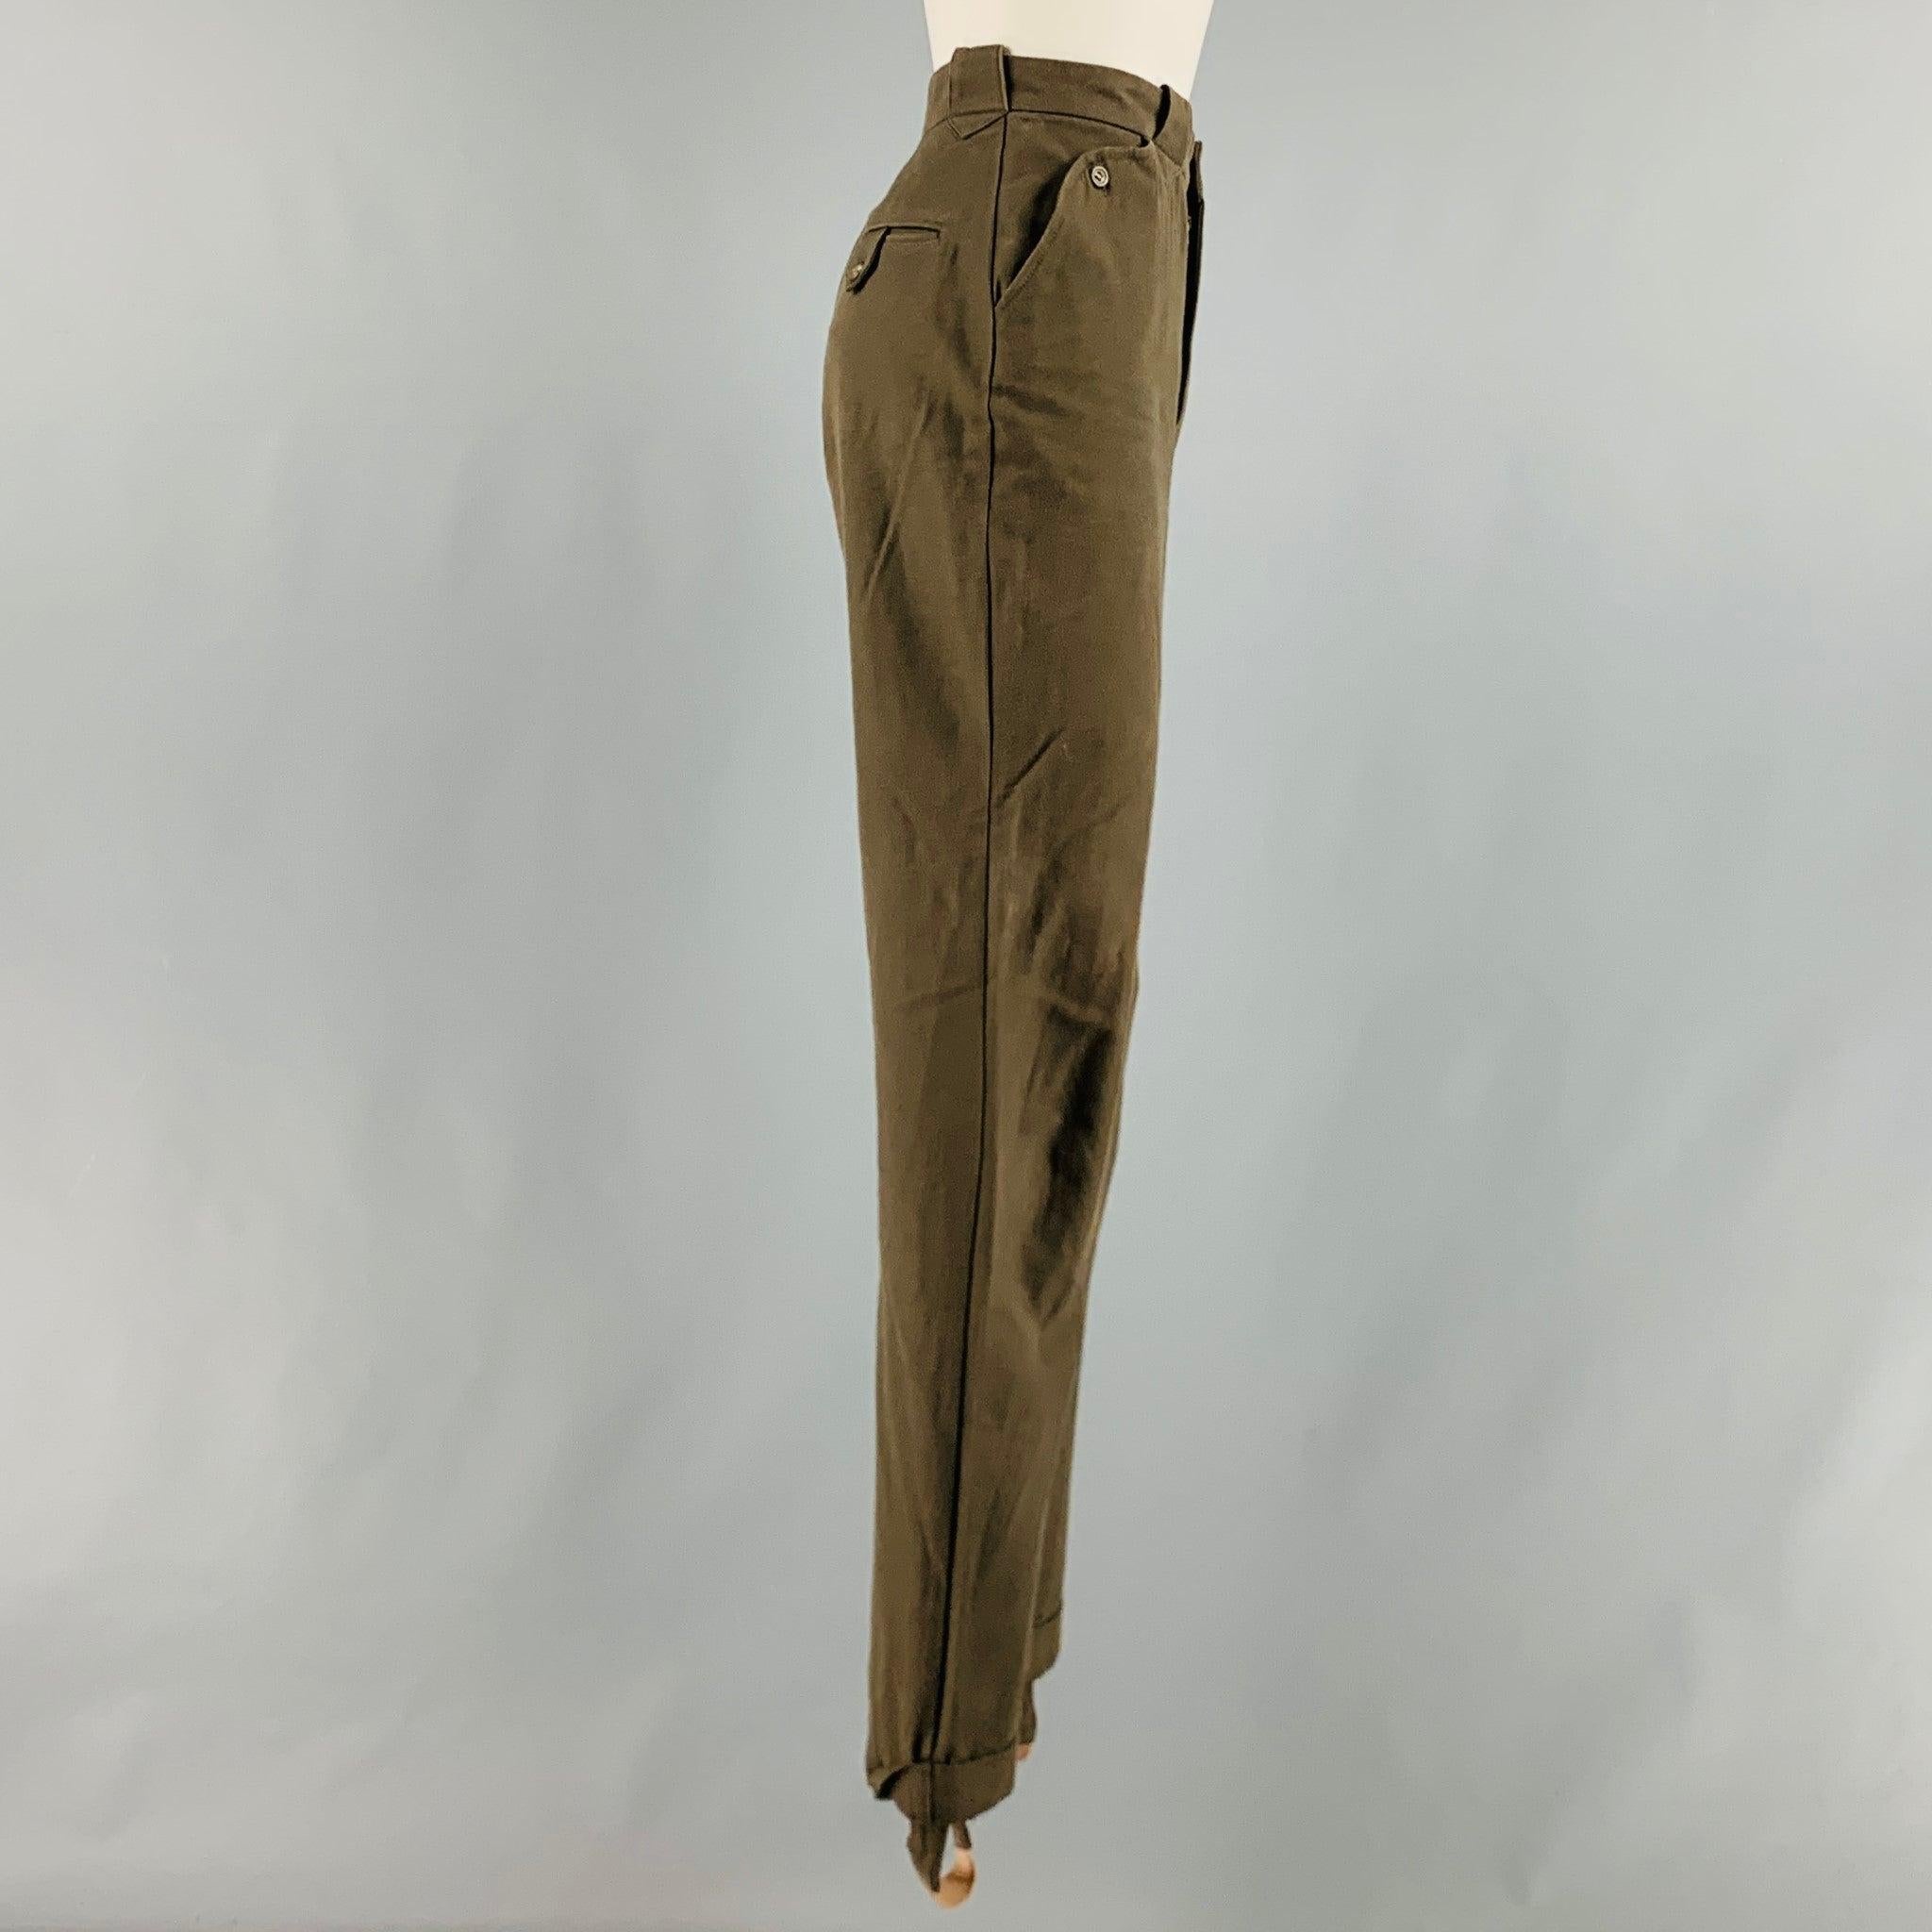 RALPH LAUREN COUNTRY casual pants comes in a green olive cotton twill featuring brown suede patch details, cuffed removable jodhpur, high waist, and a zip fly closure. Made in USA.Excellent Pre-Owned Condition. 

Marked:   10 

Measurements: 
 